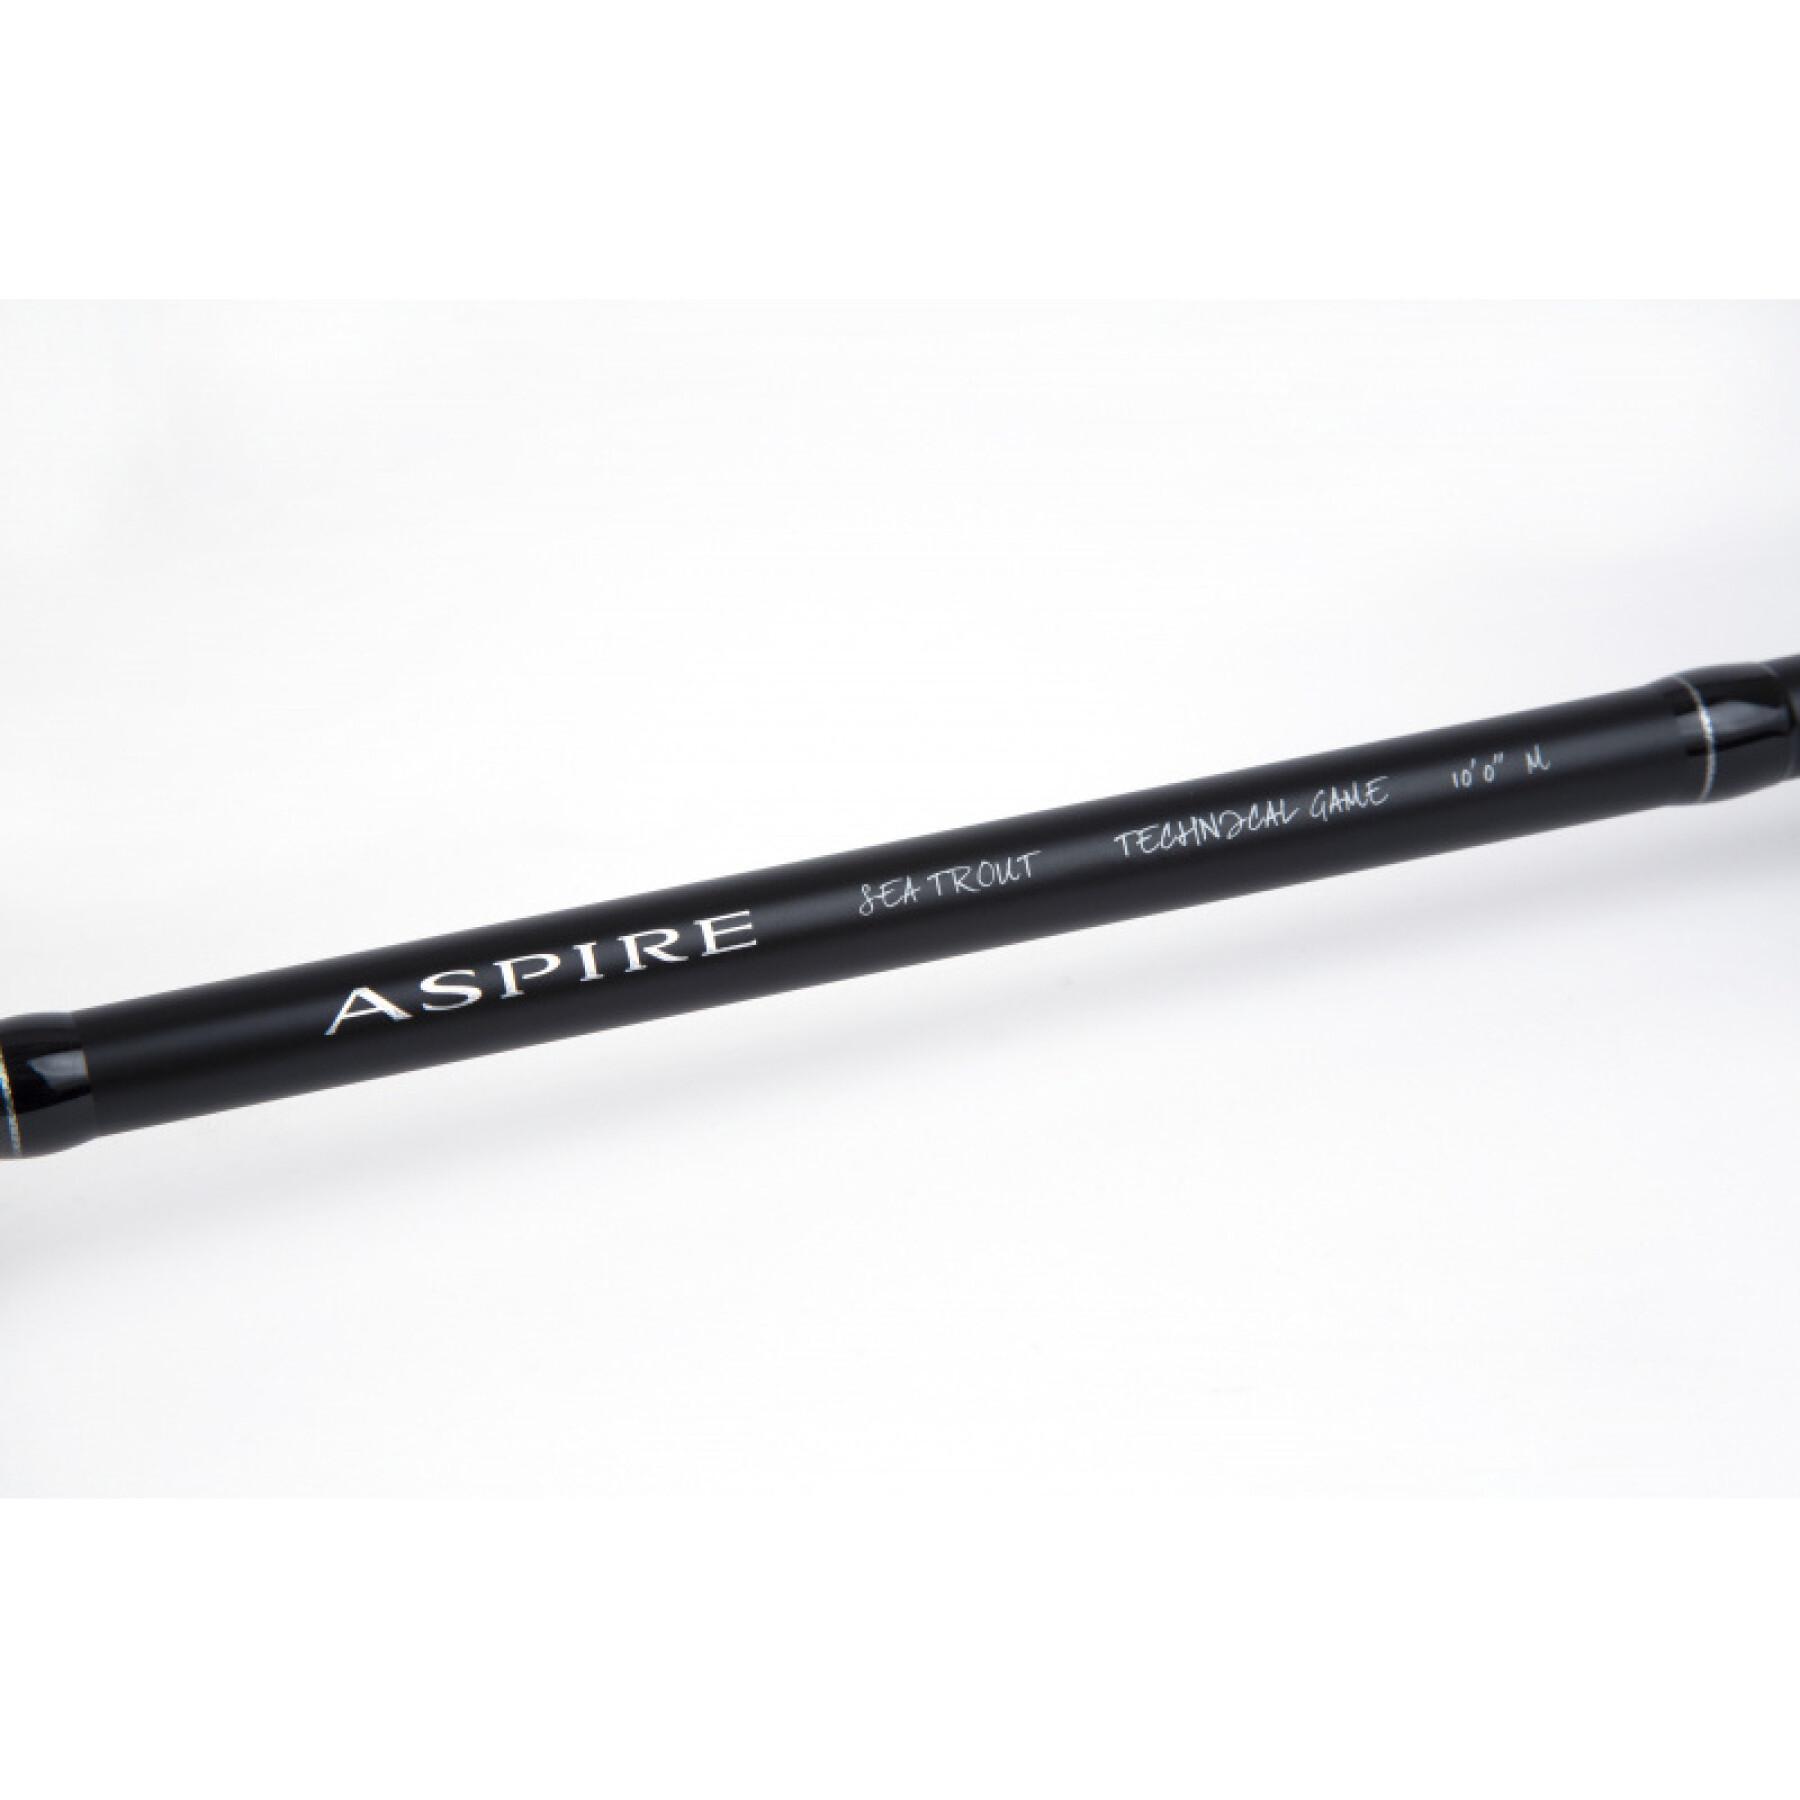 Spinning rods Shimano Aspire Spinning Sea Trout 9'0 7-30g